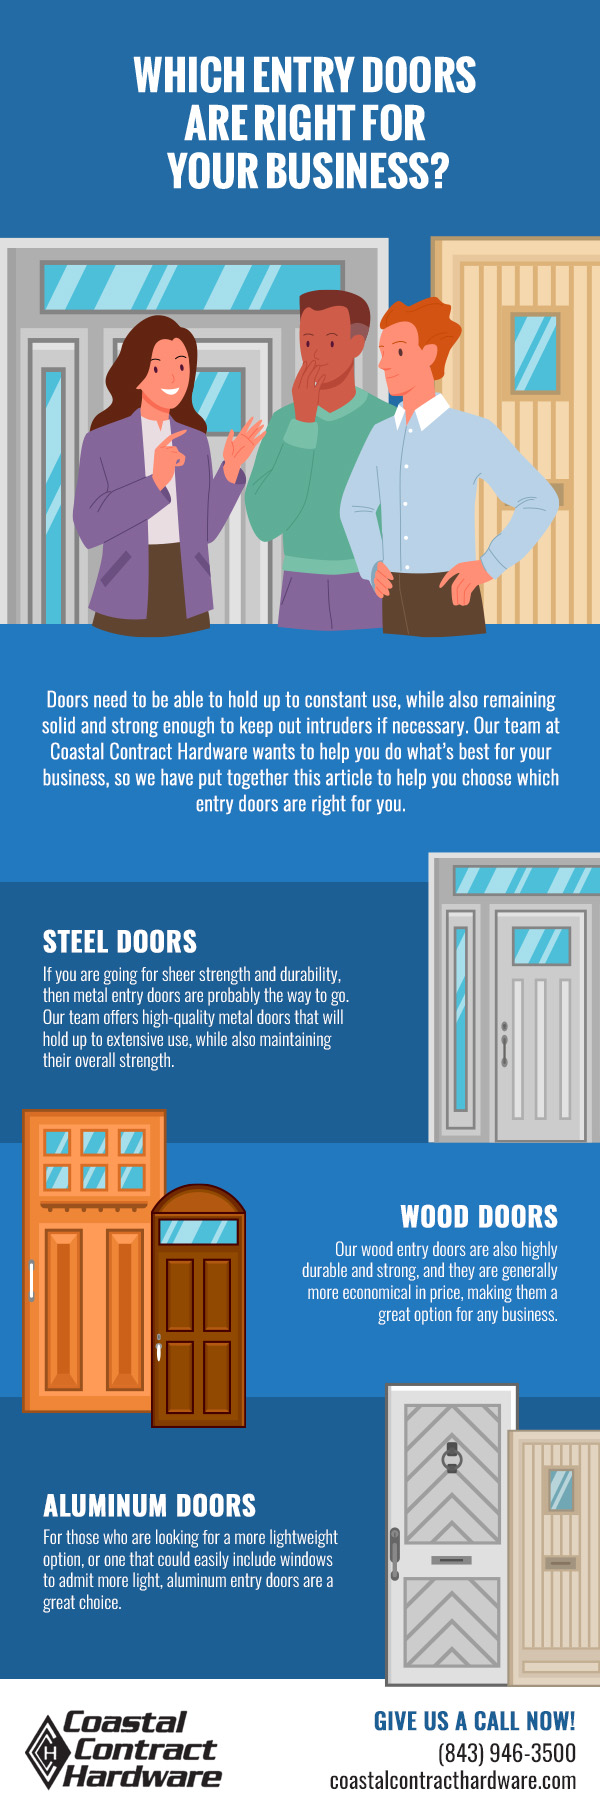 Which Entry Doors are Right for Your Business? [infographic]